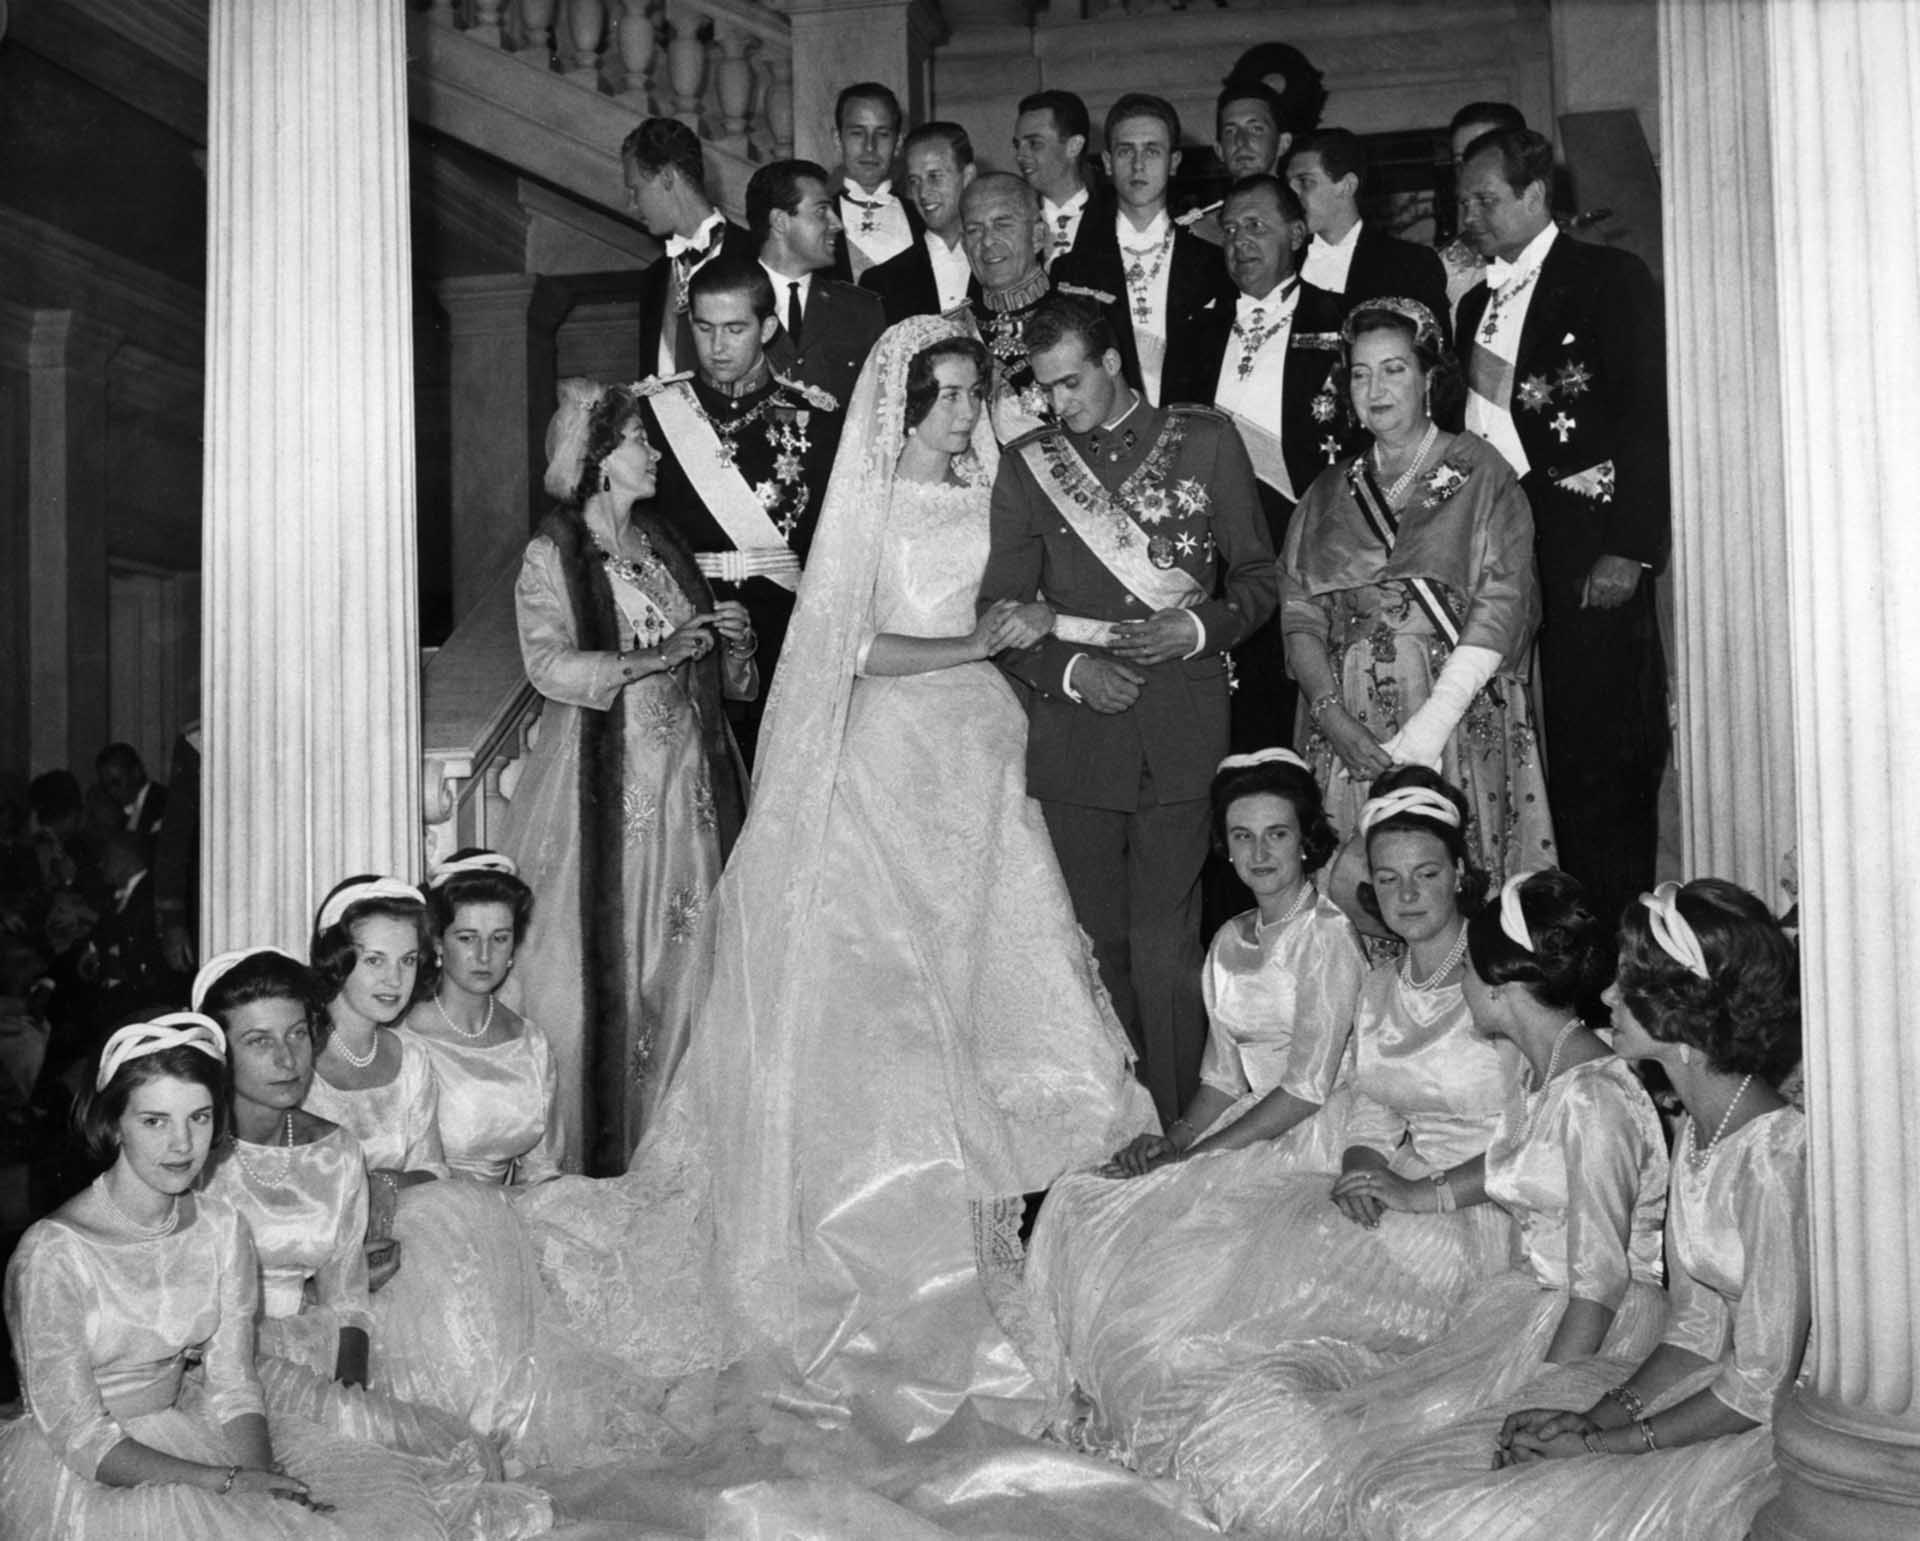 Princess Sophie of Greece and Crown Prince Don Juan Carlos are pictured with their eight bridemaids and relatives at the Royal Palace in Athens, Greece, following wedding ceremonies, May 14, 1962. King Paul, wearing the full dress uniform of a field marshal, stands behind the bridal couple. Great Britain's Princess Alexandra is seen fourth from the left.